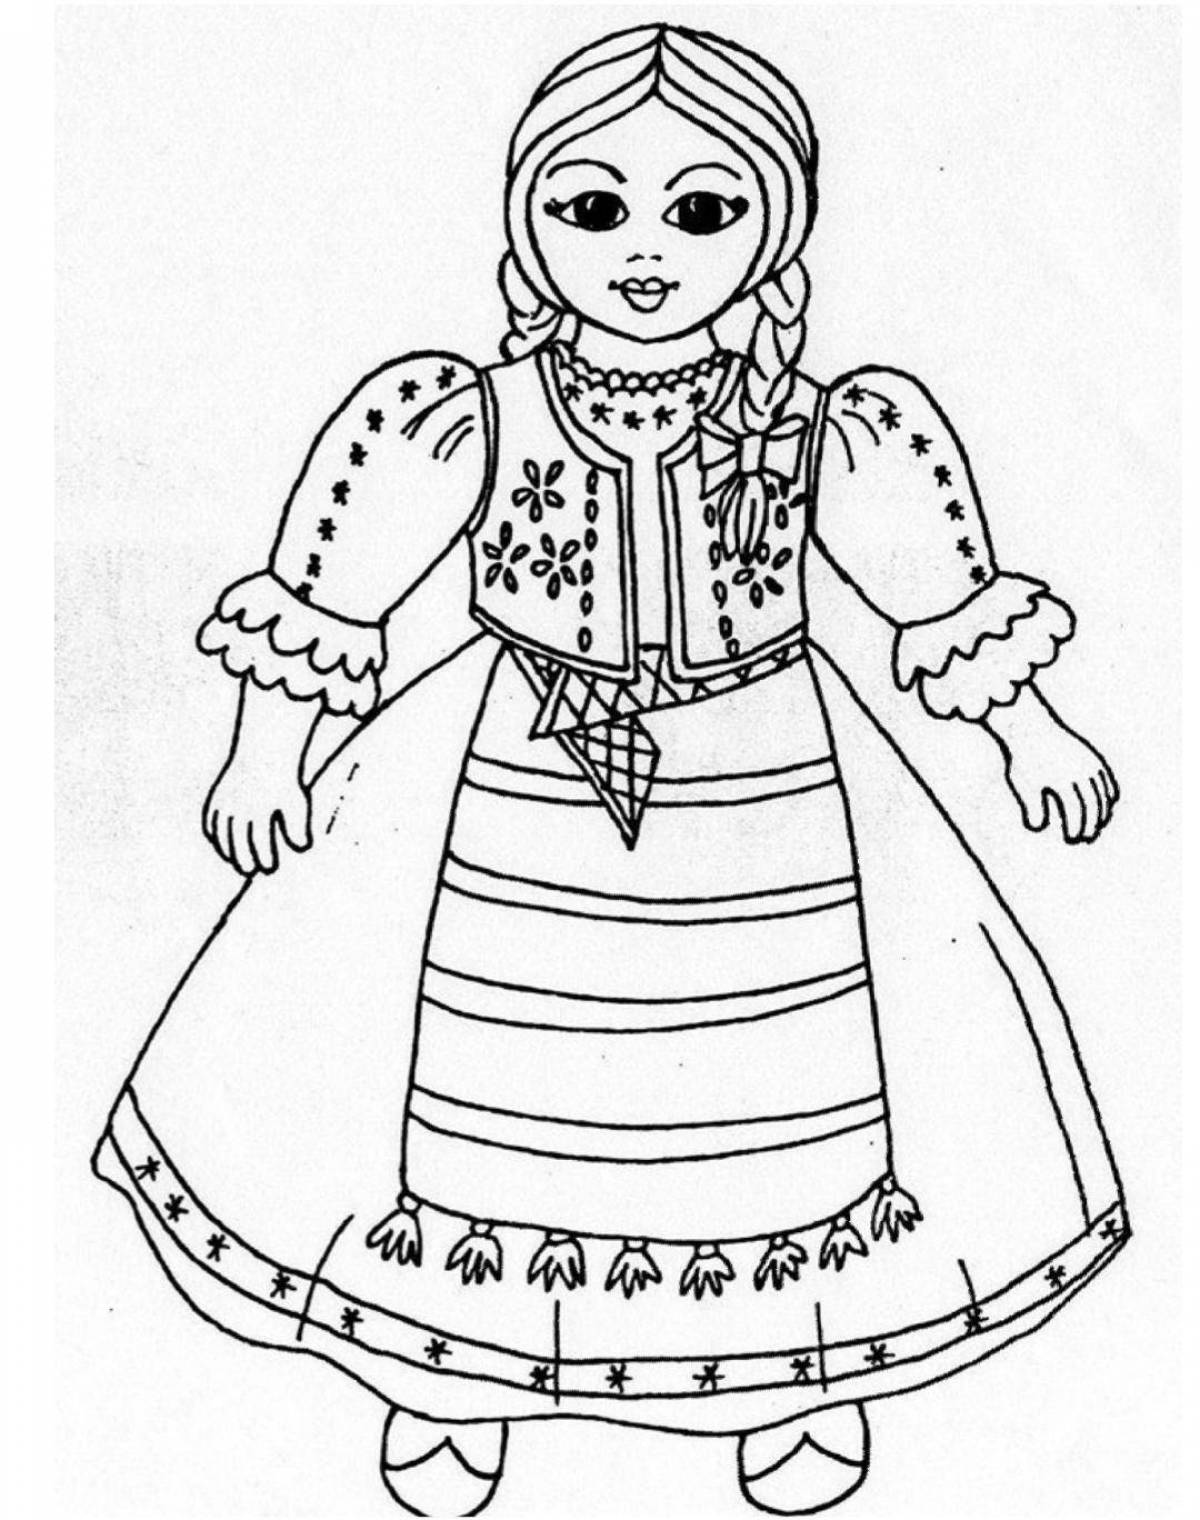 Coloring book nice belarusian clothes for children